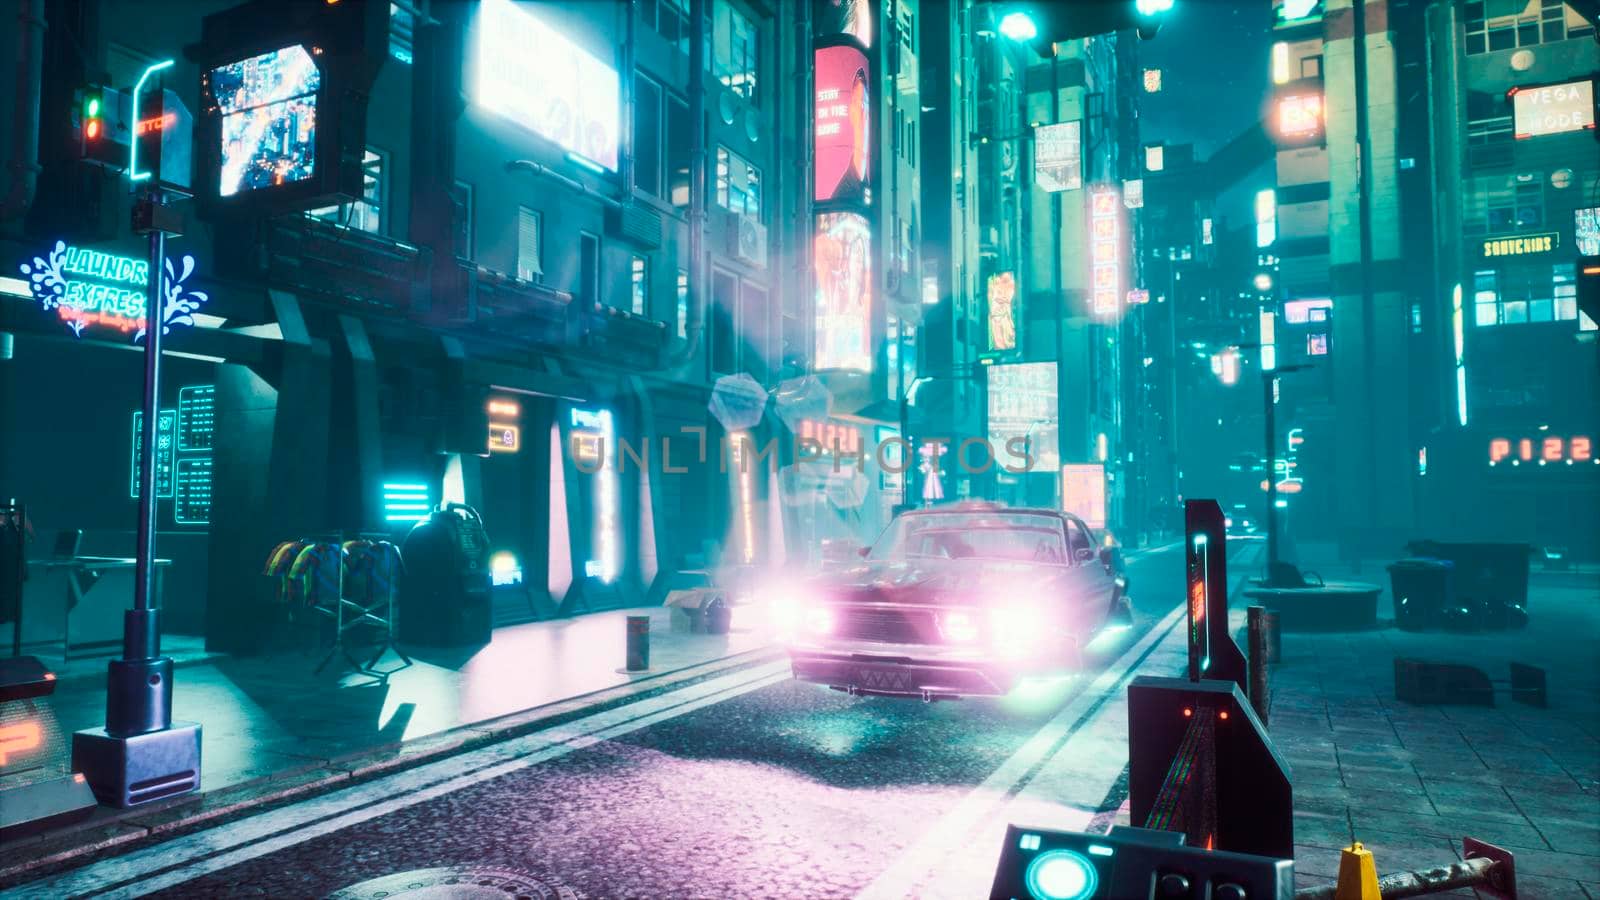 Flying cars rush along the neon night street of the city of the future. View of an future fiction city. Sci-fi cyber world concept.